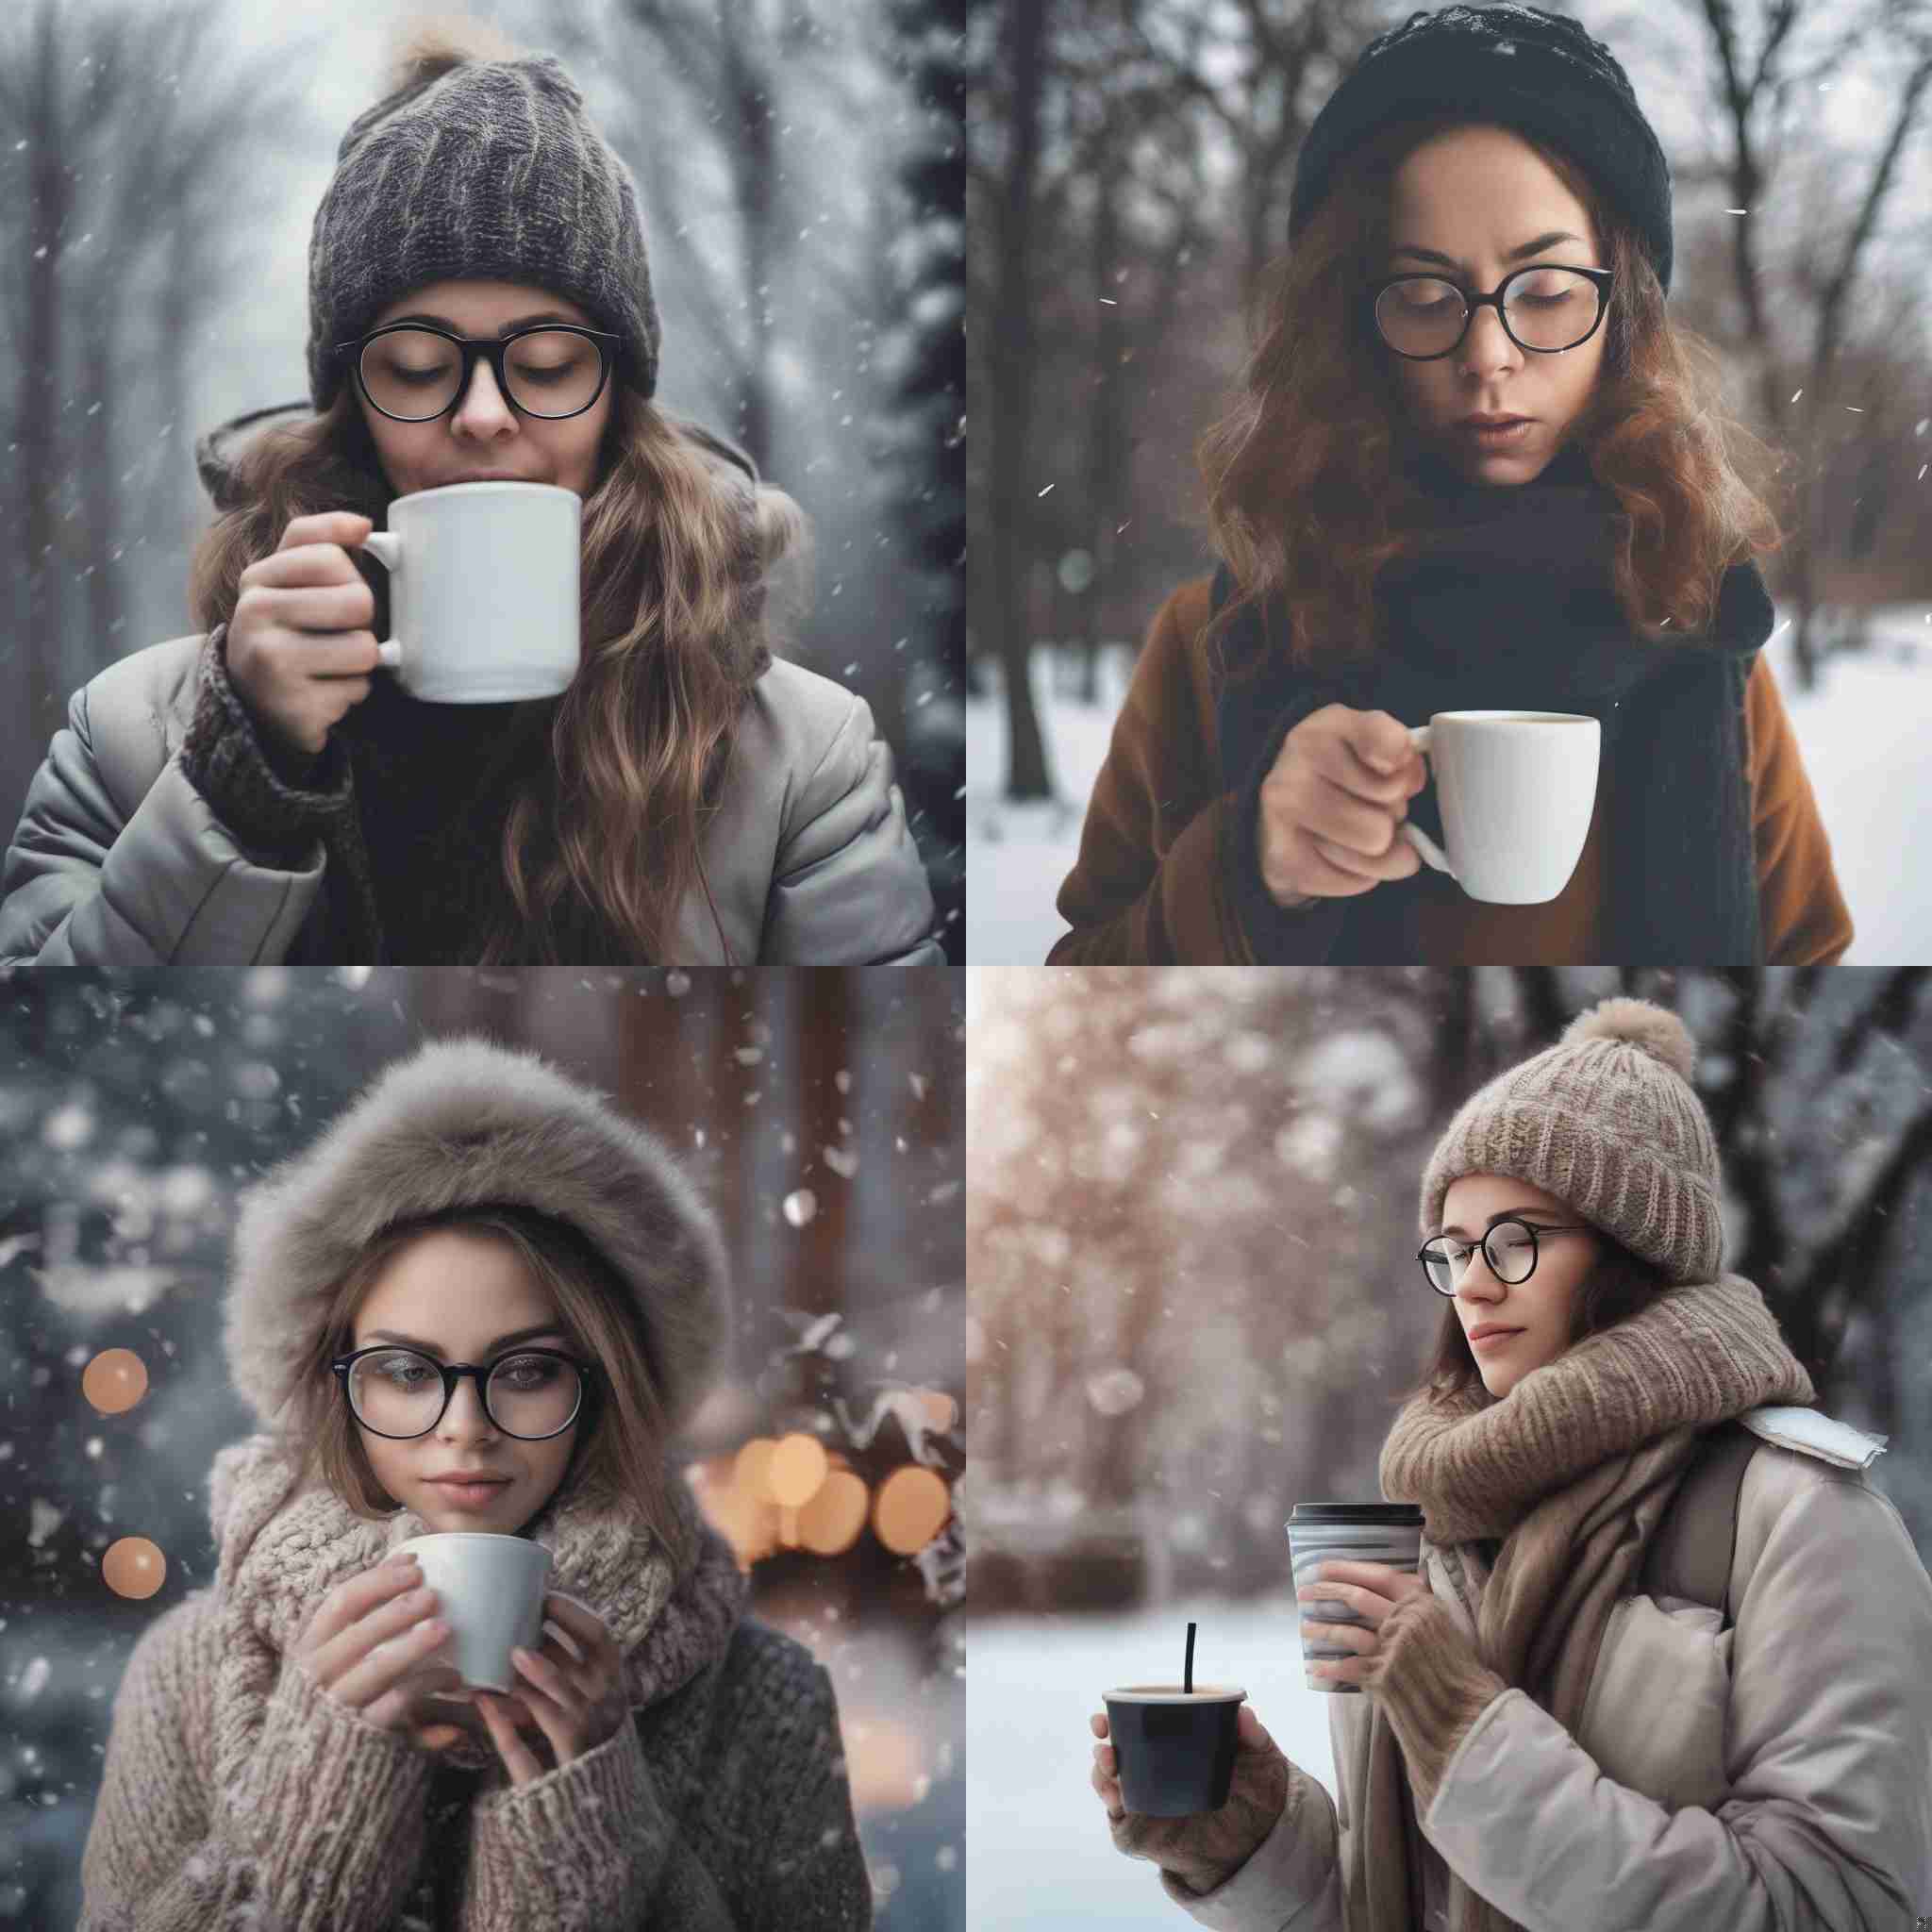 A person with glasses drinking hot coffee in winter